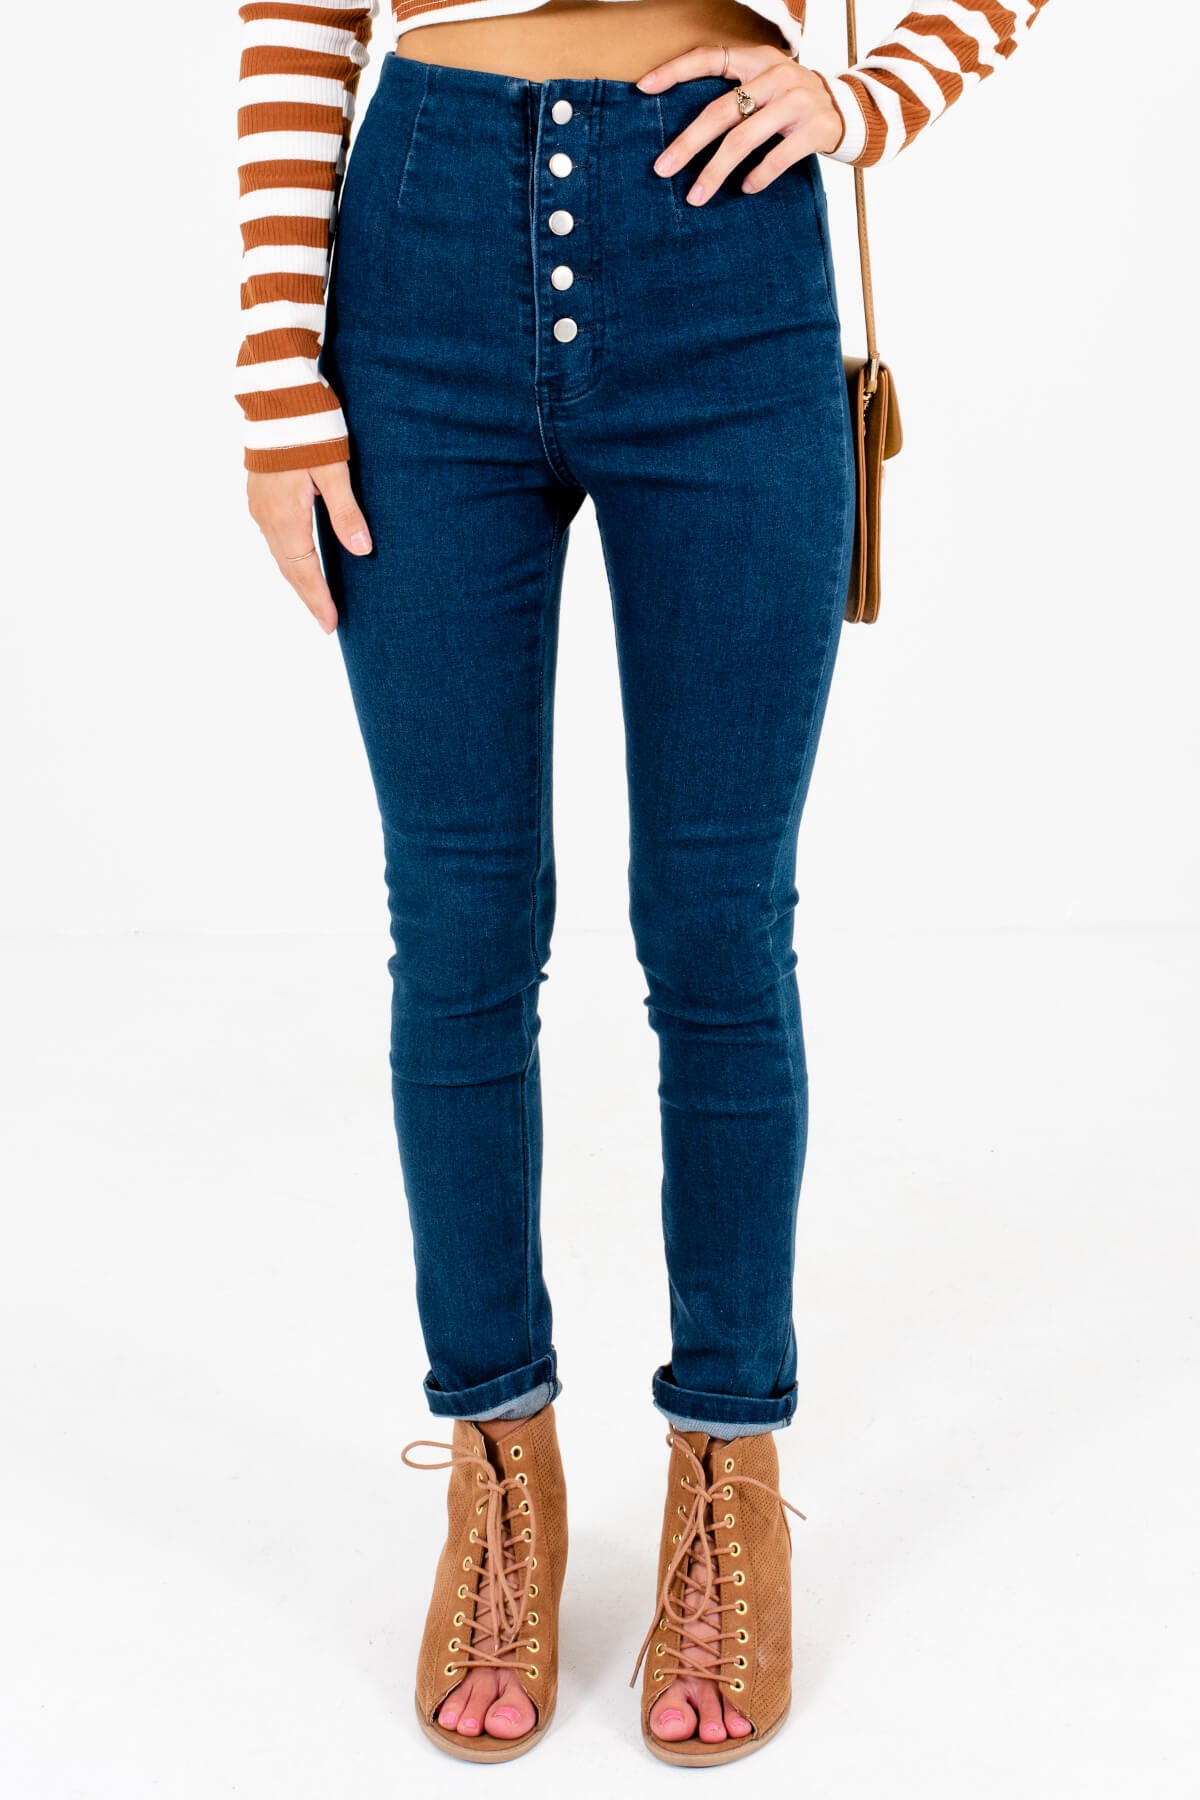 boutique skinny jeans